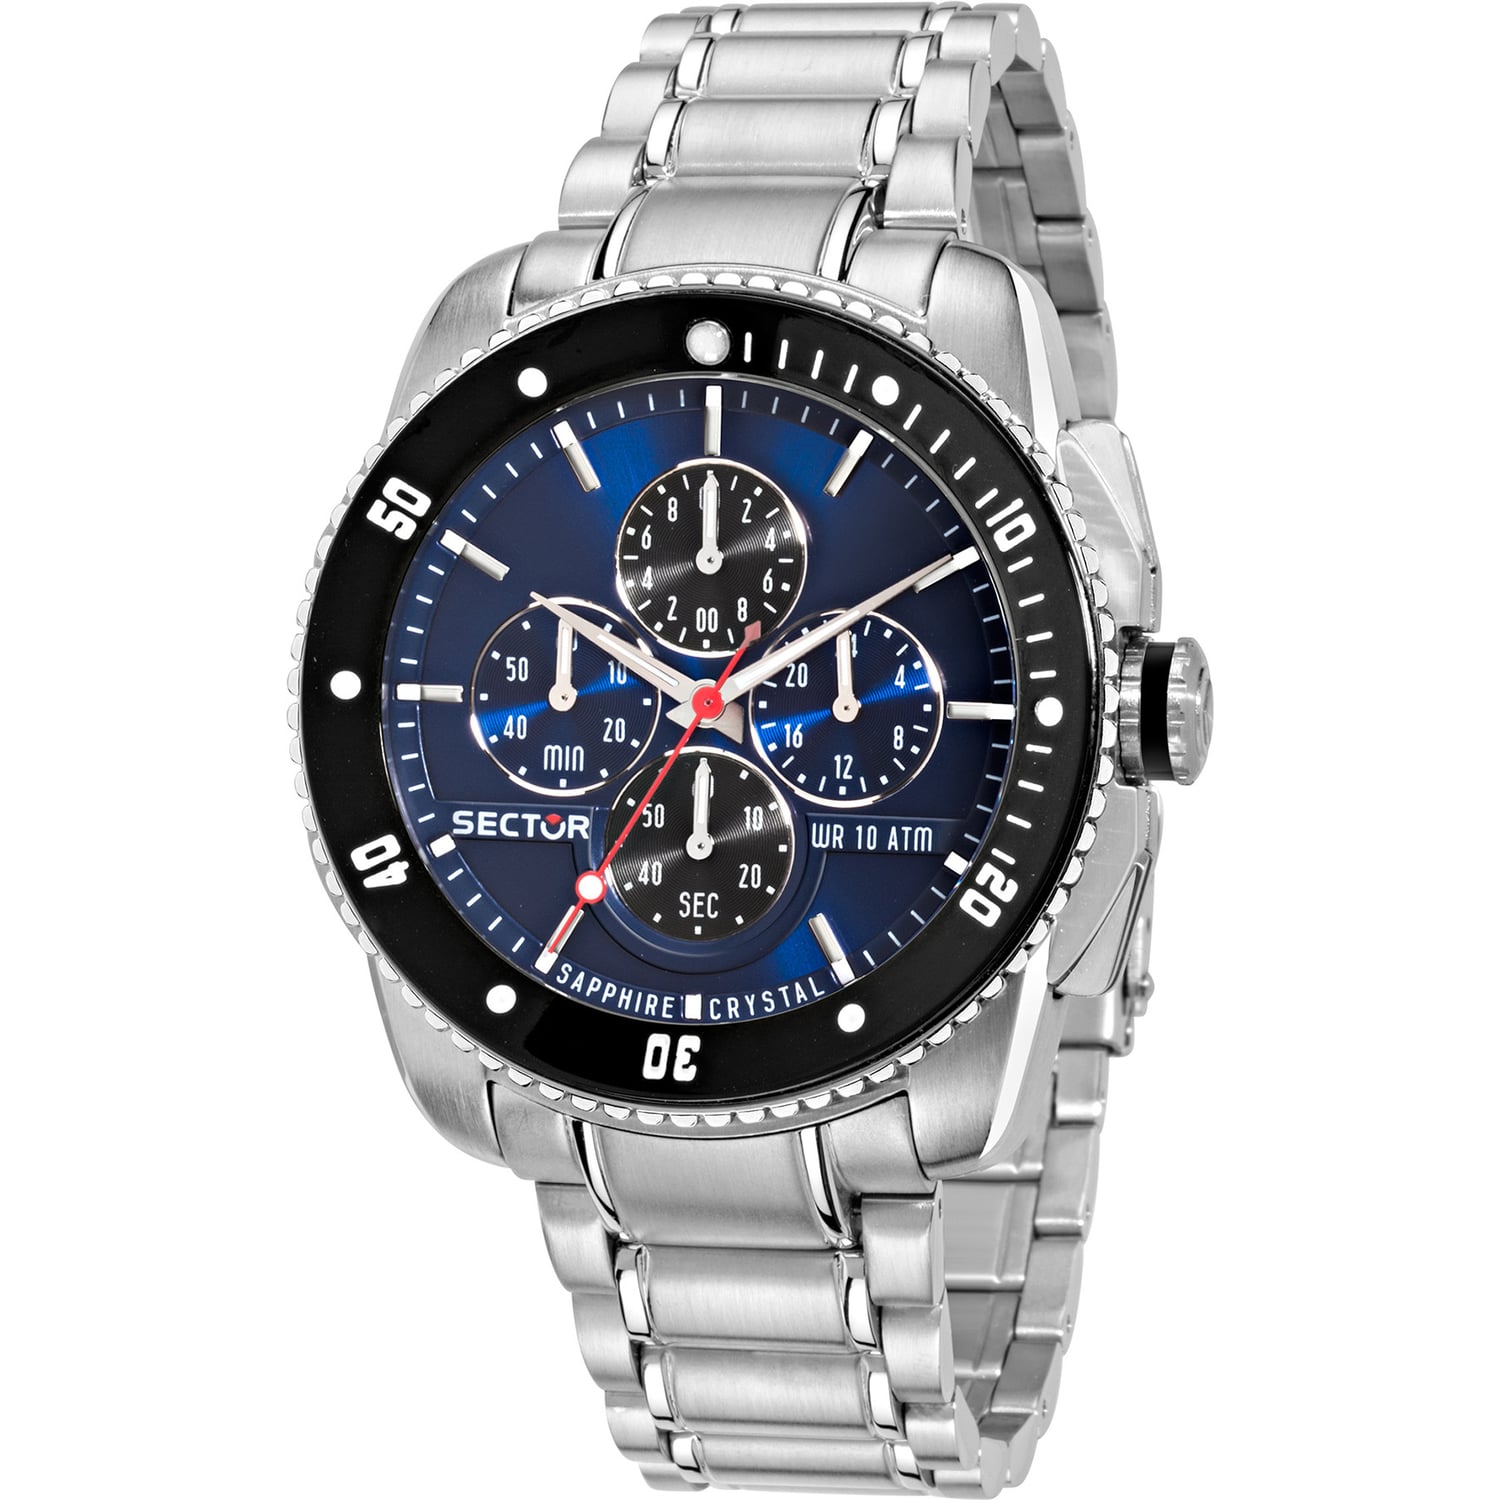 R3273903006 - Sector Male Chronograph - Official Site